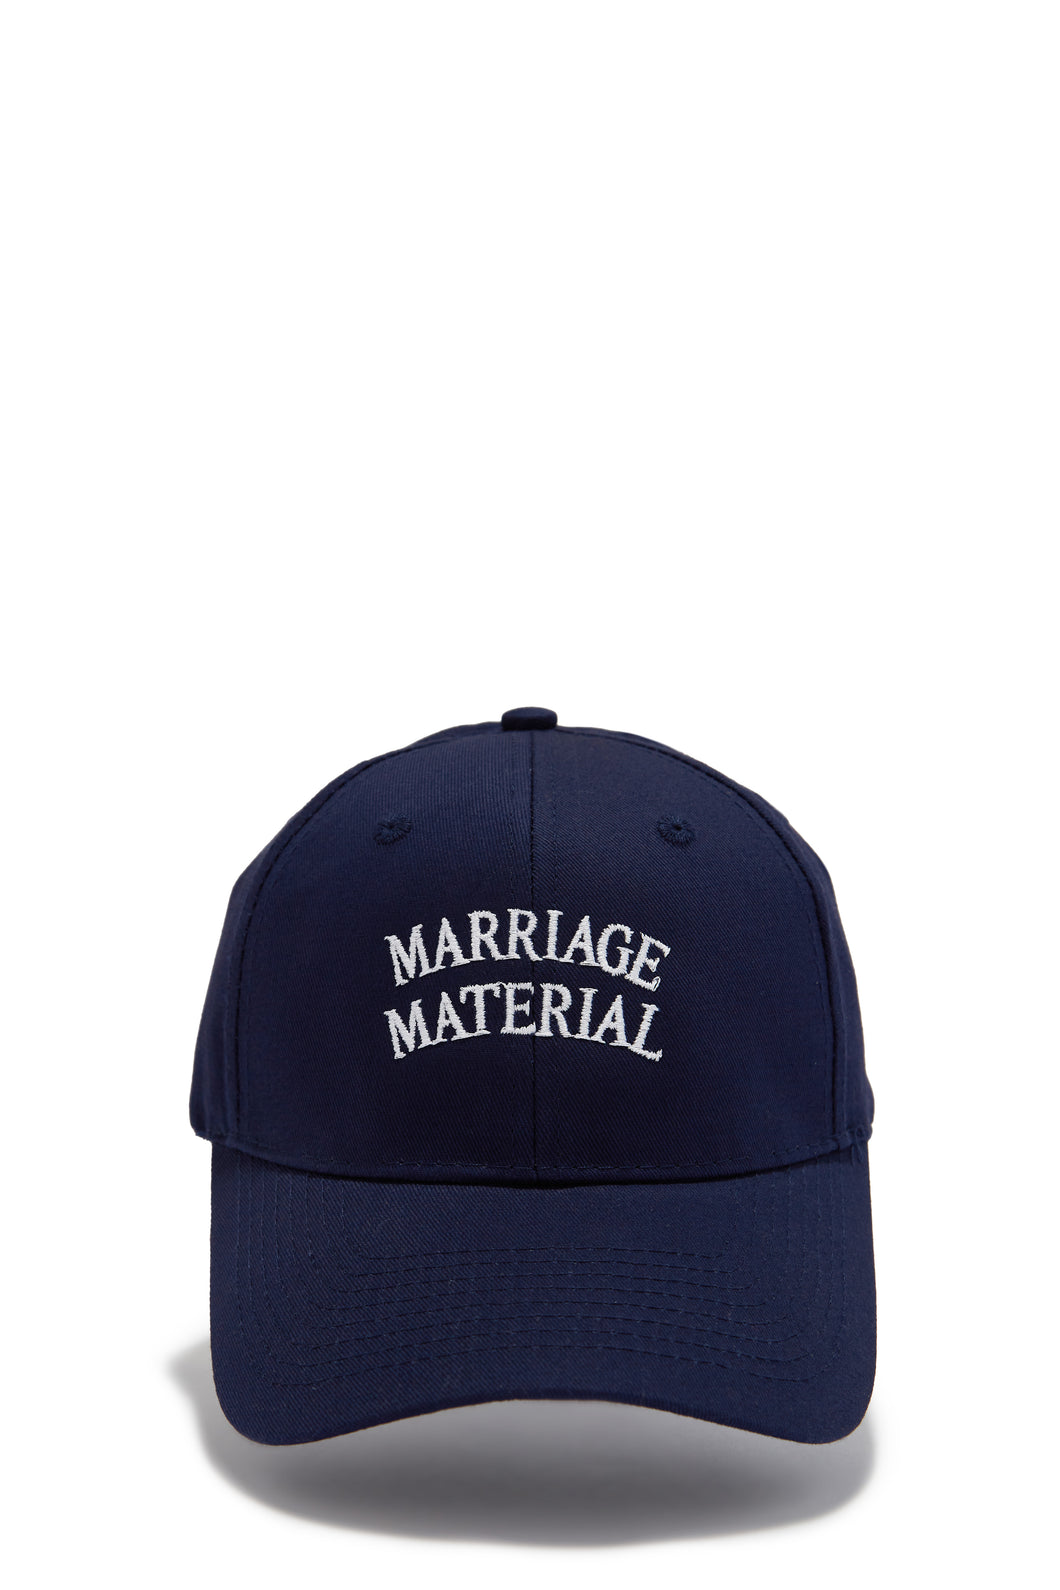 Marriage Material Exclusive Hat - Navy